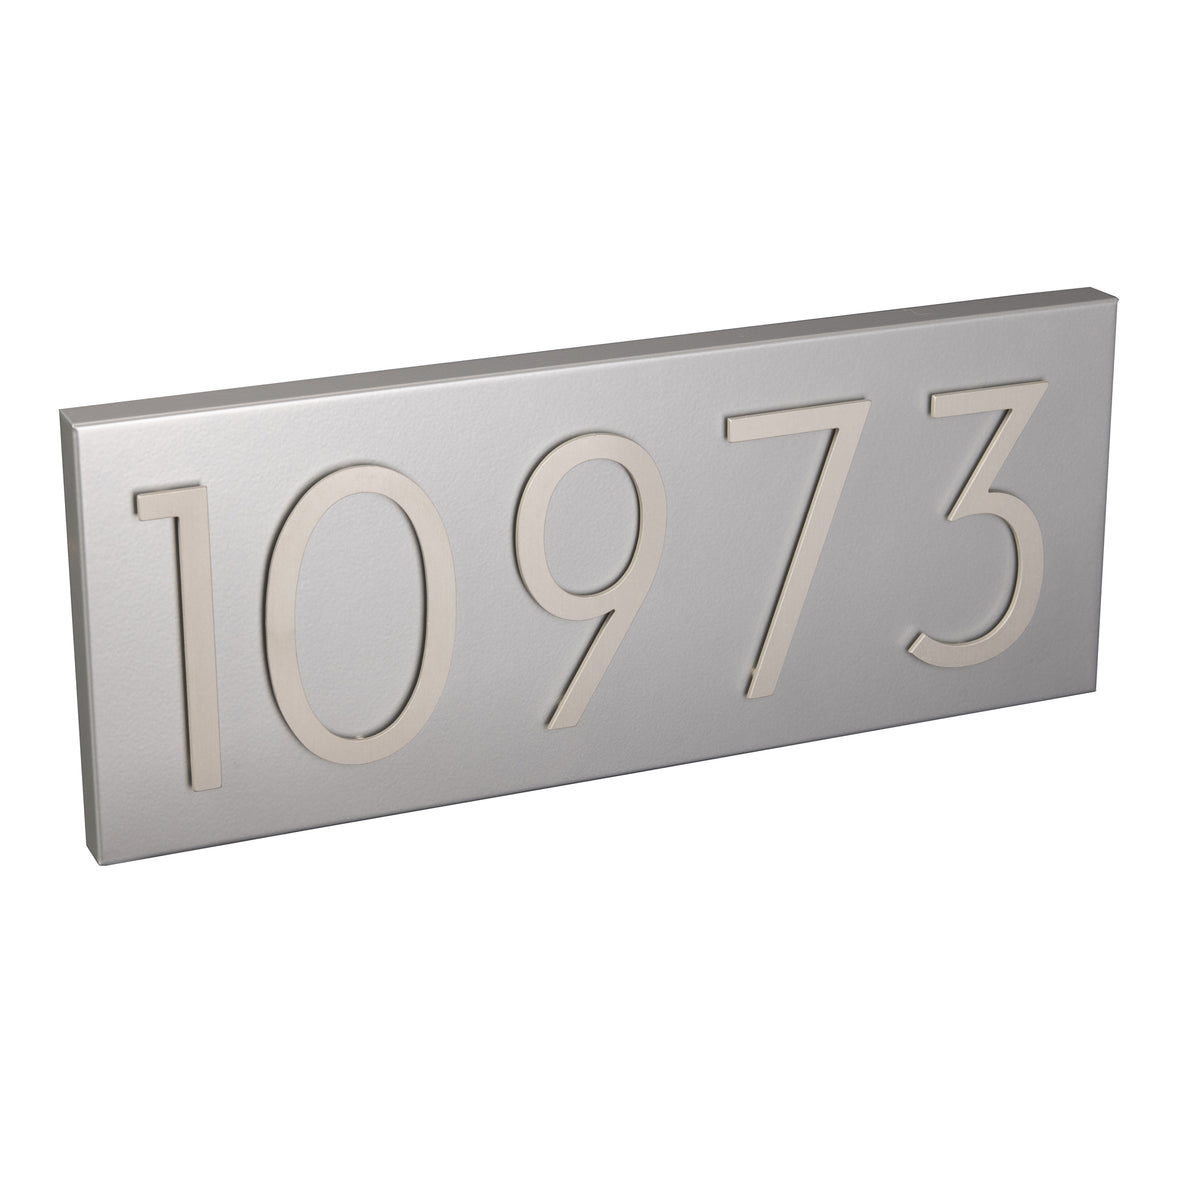 anodized aluminum effect address plaque with silver numbers